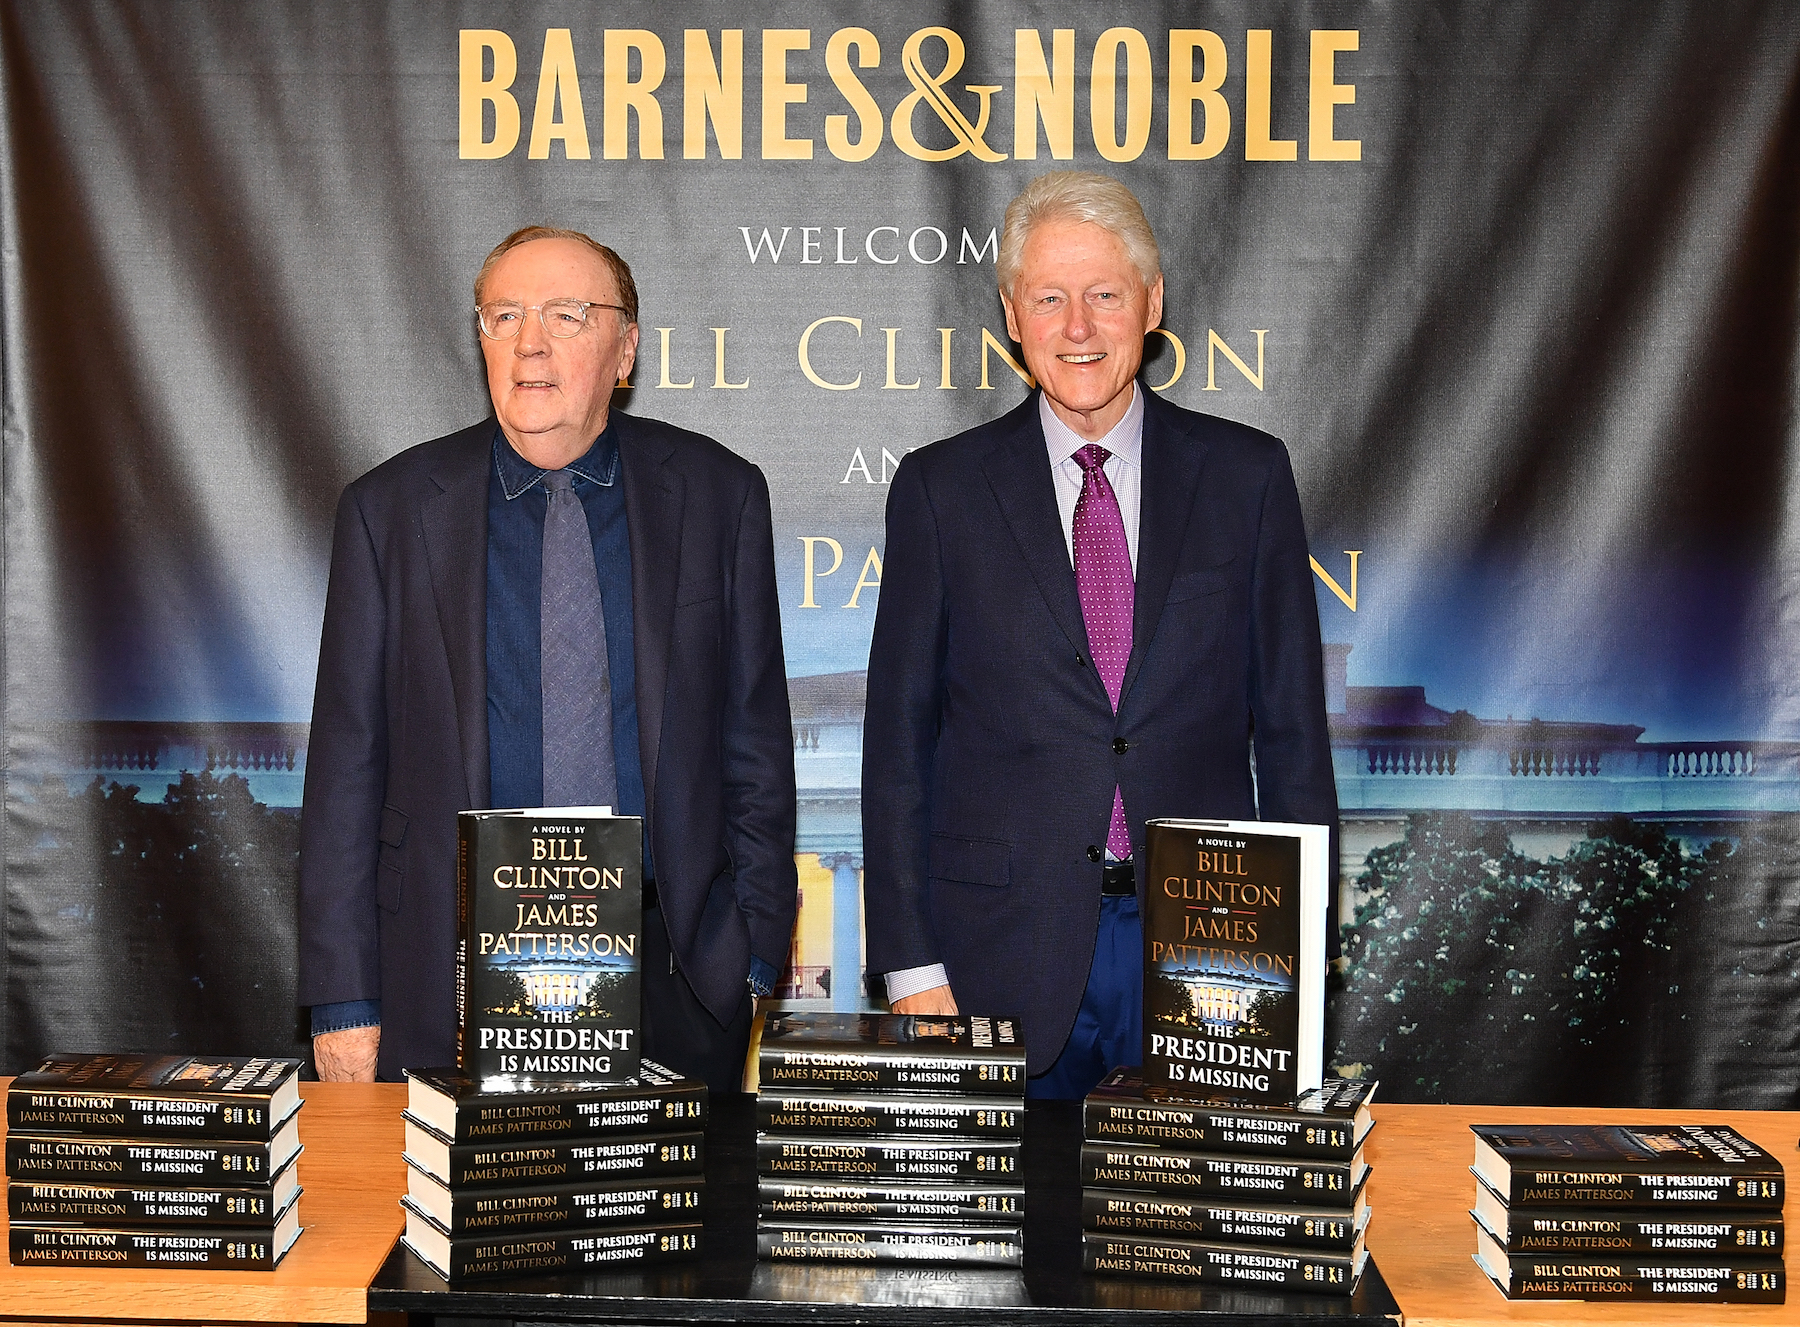 James Patterson (L) and Bill Clinton sign copies of their new book "The President Is Missing" at Barnes & Noble, 5th Avenue on June 5, 2018 in New York City.  (Photo by Slaven Vlasic/Getty Images)